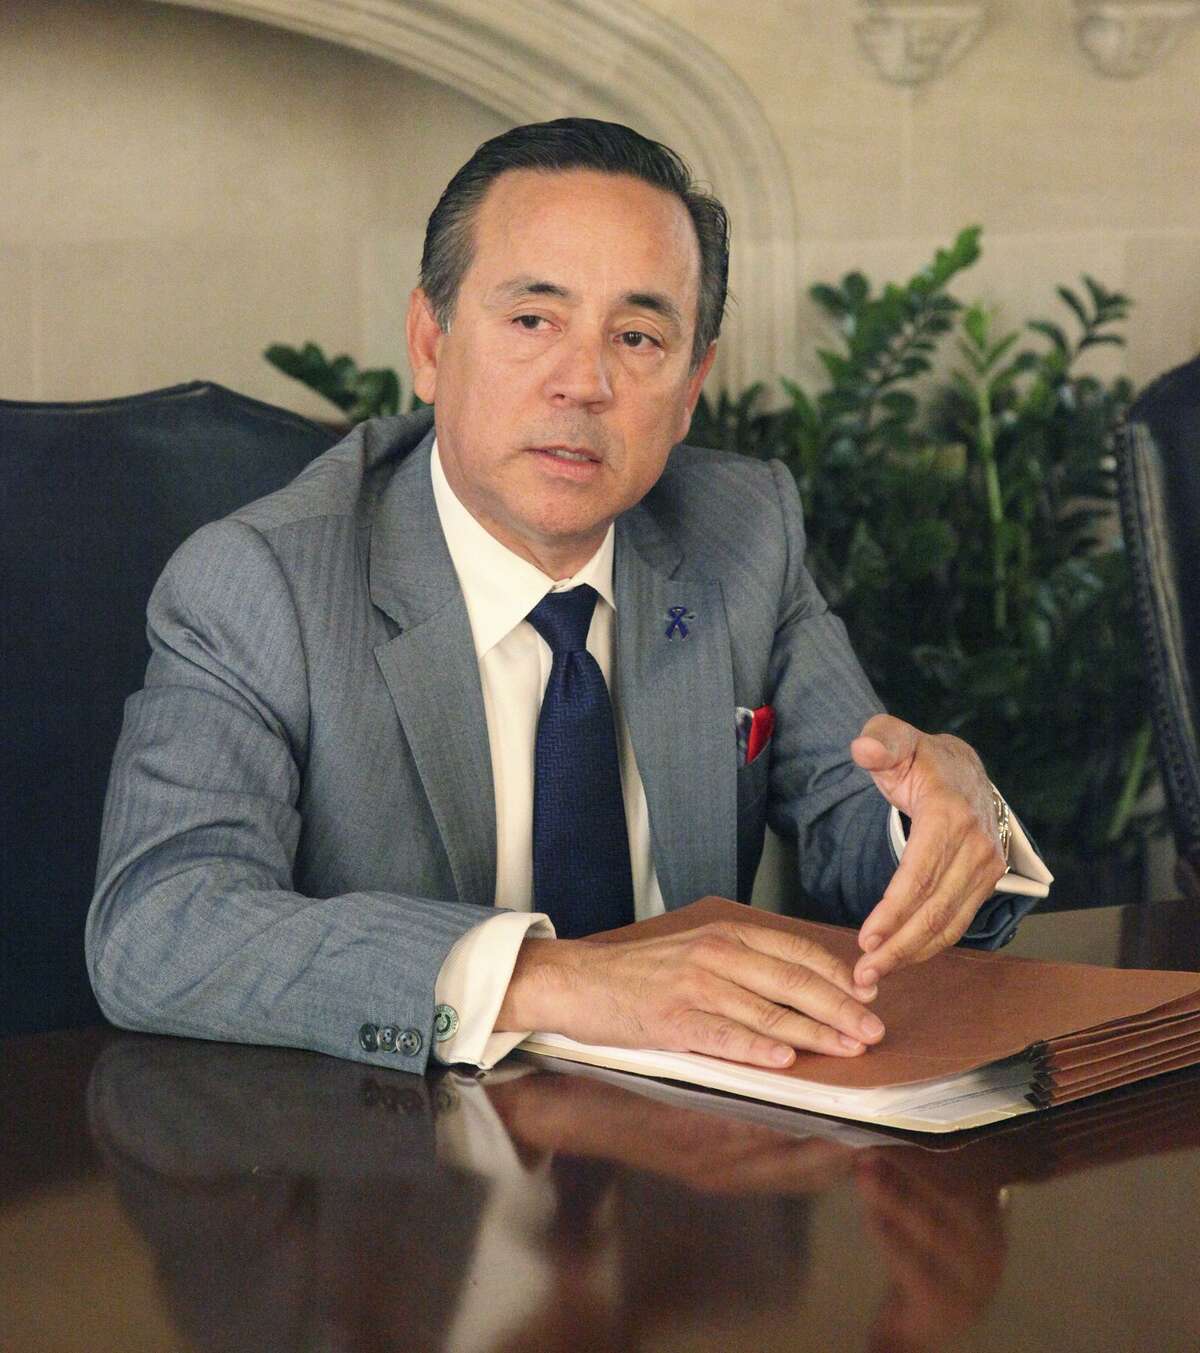 State Sen. Carlos Uresti has said he was contacted by the FBI “as a witness” in an investigation of bankrupt frac-sand company FourWinds and its one-time CEO Stan Bates.